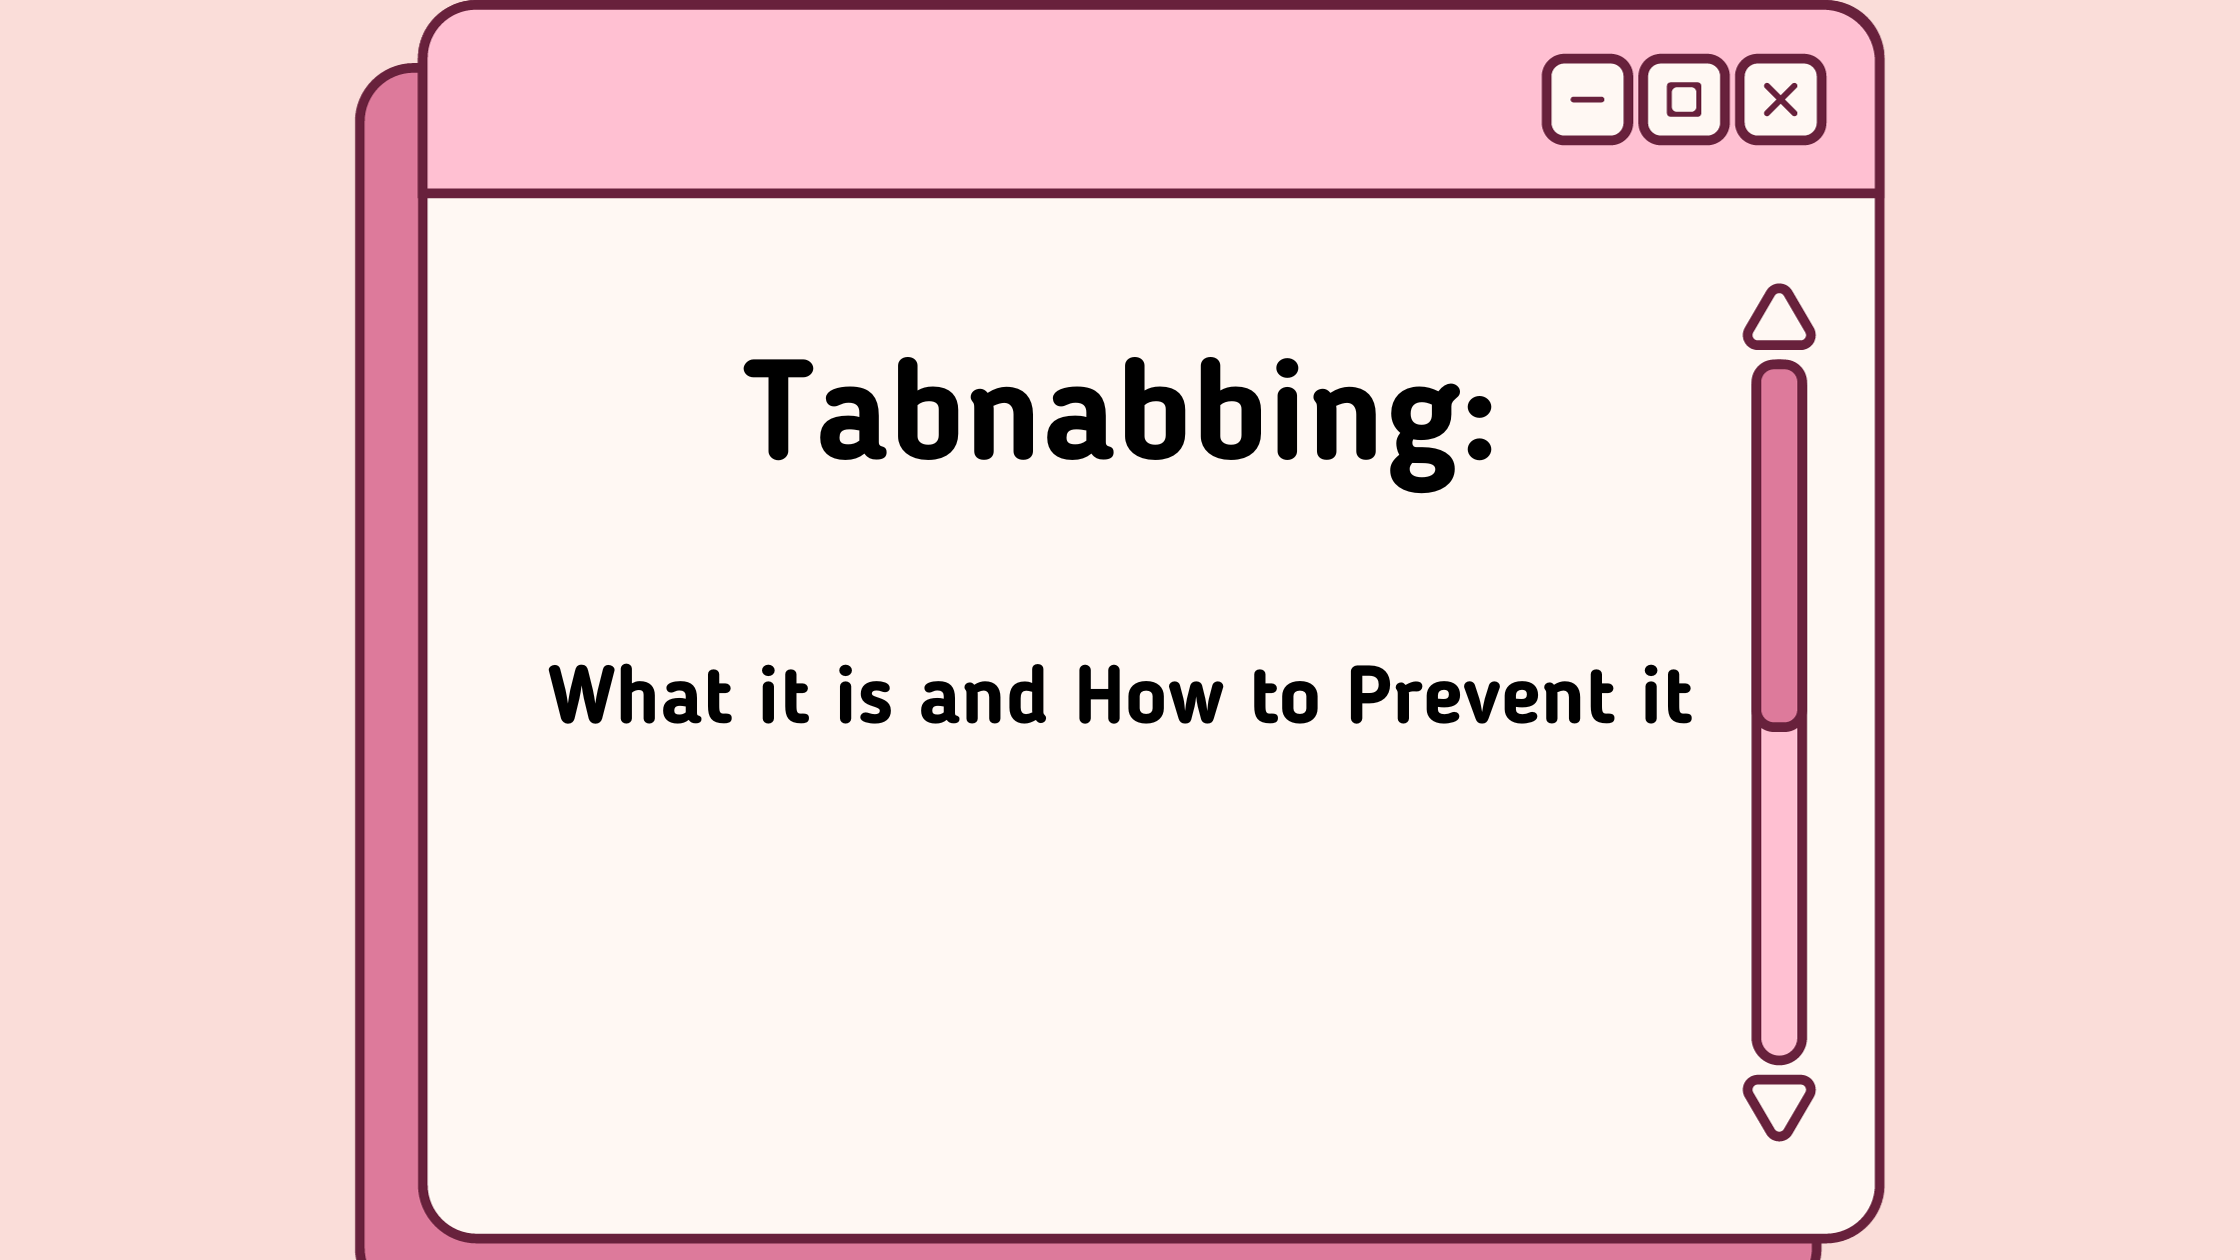 What is Tabnabbing and How to Prevent it